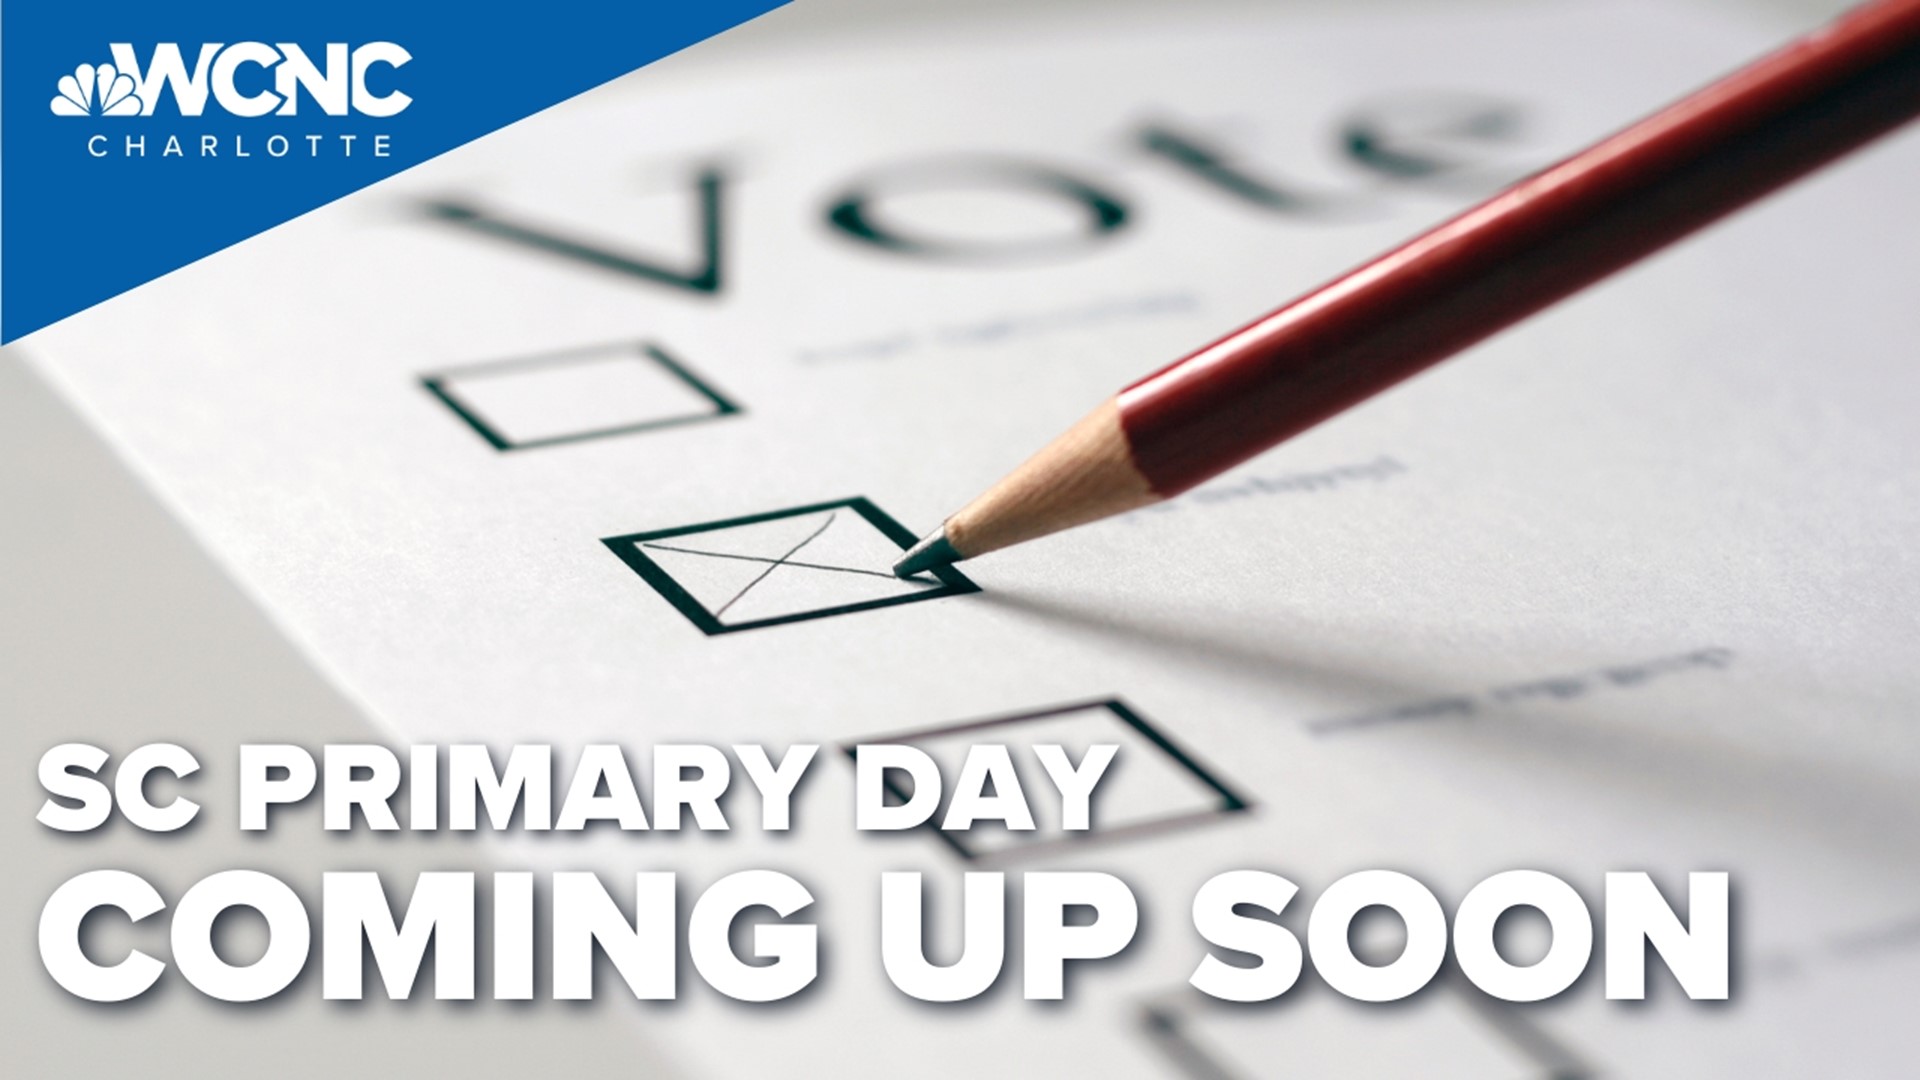 Primary Election Day is on Tuesday, June 14. Polls open from 7 a.m. to 7 p.m.